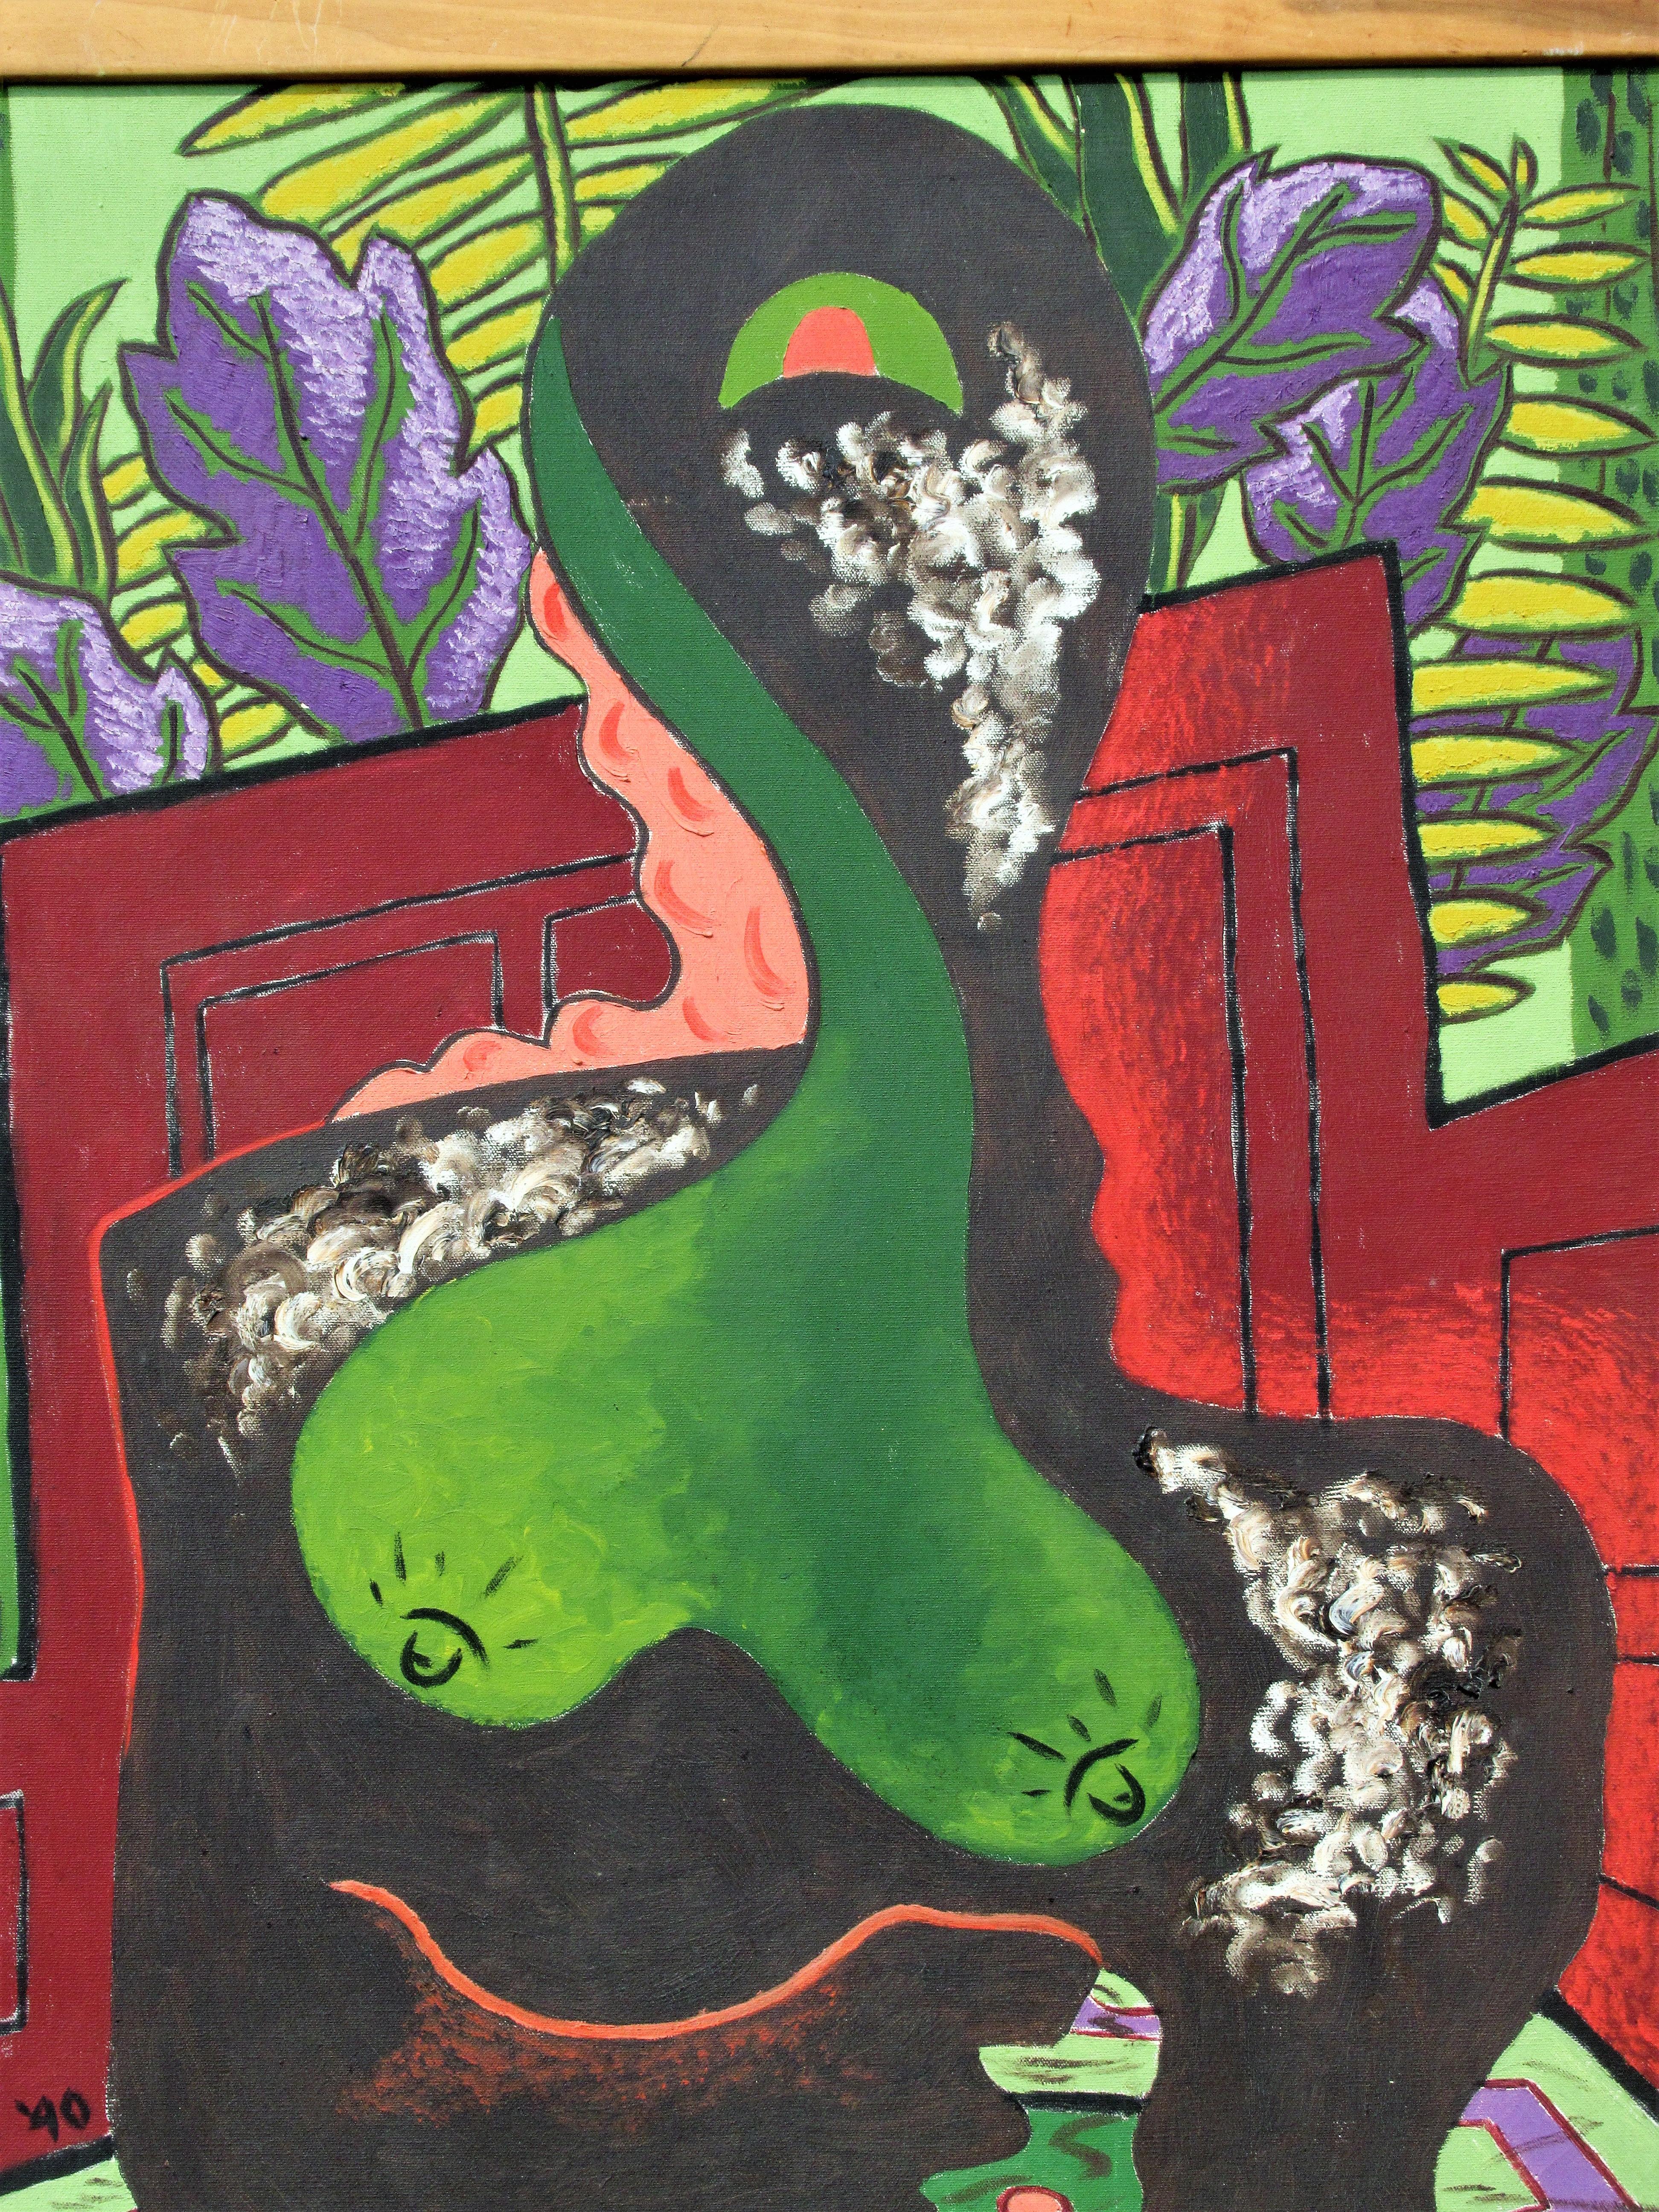 Brilliant jewel tone oil painting on canvas of an abstracted nude woman surrounded by exotic looking foliage & more by Leon Salter aka Zoute ( 1903 - 1976, North Rose NY ) Pictures tell the rest of the story. This is a show stopper. Biographical